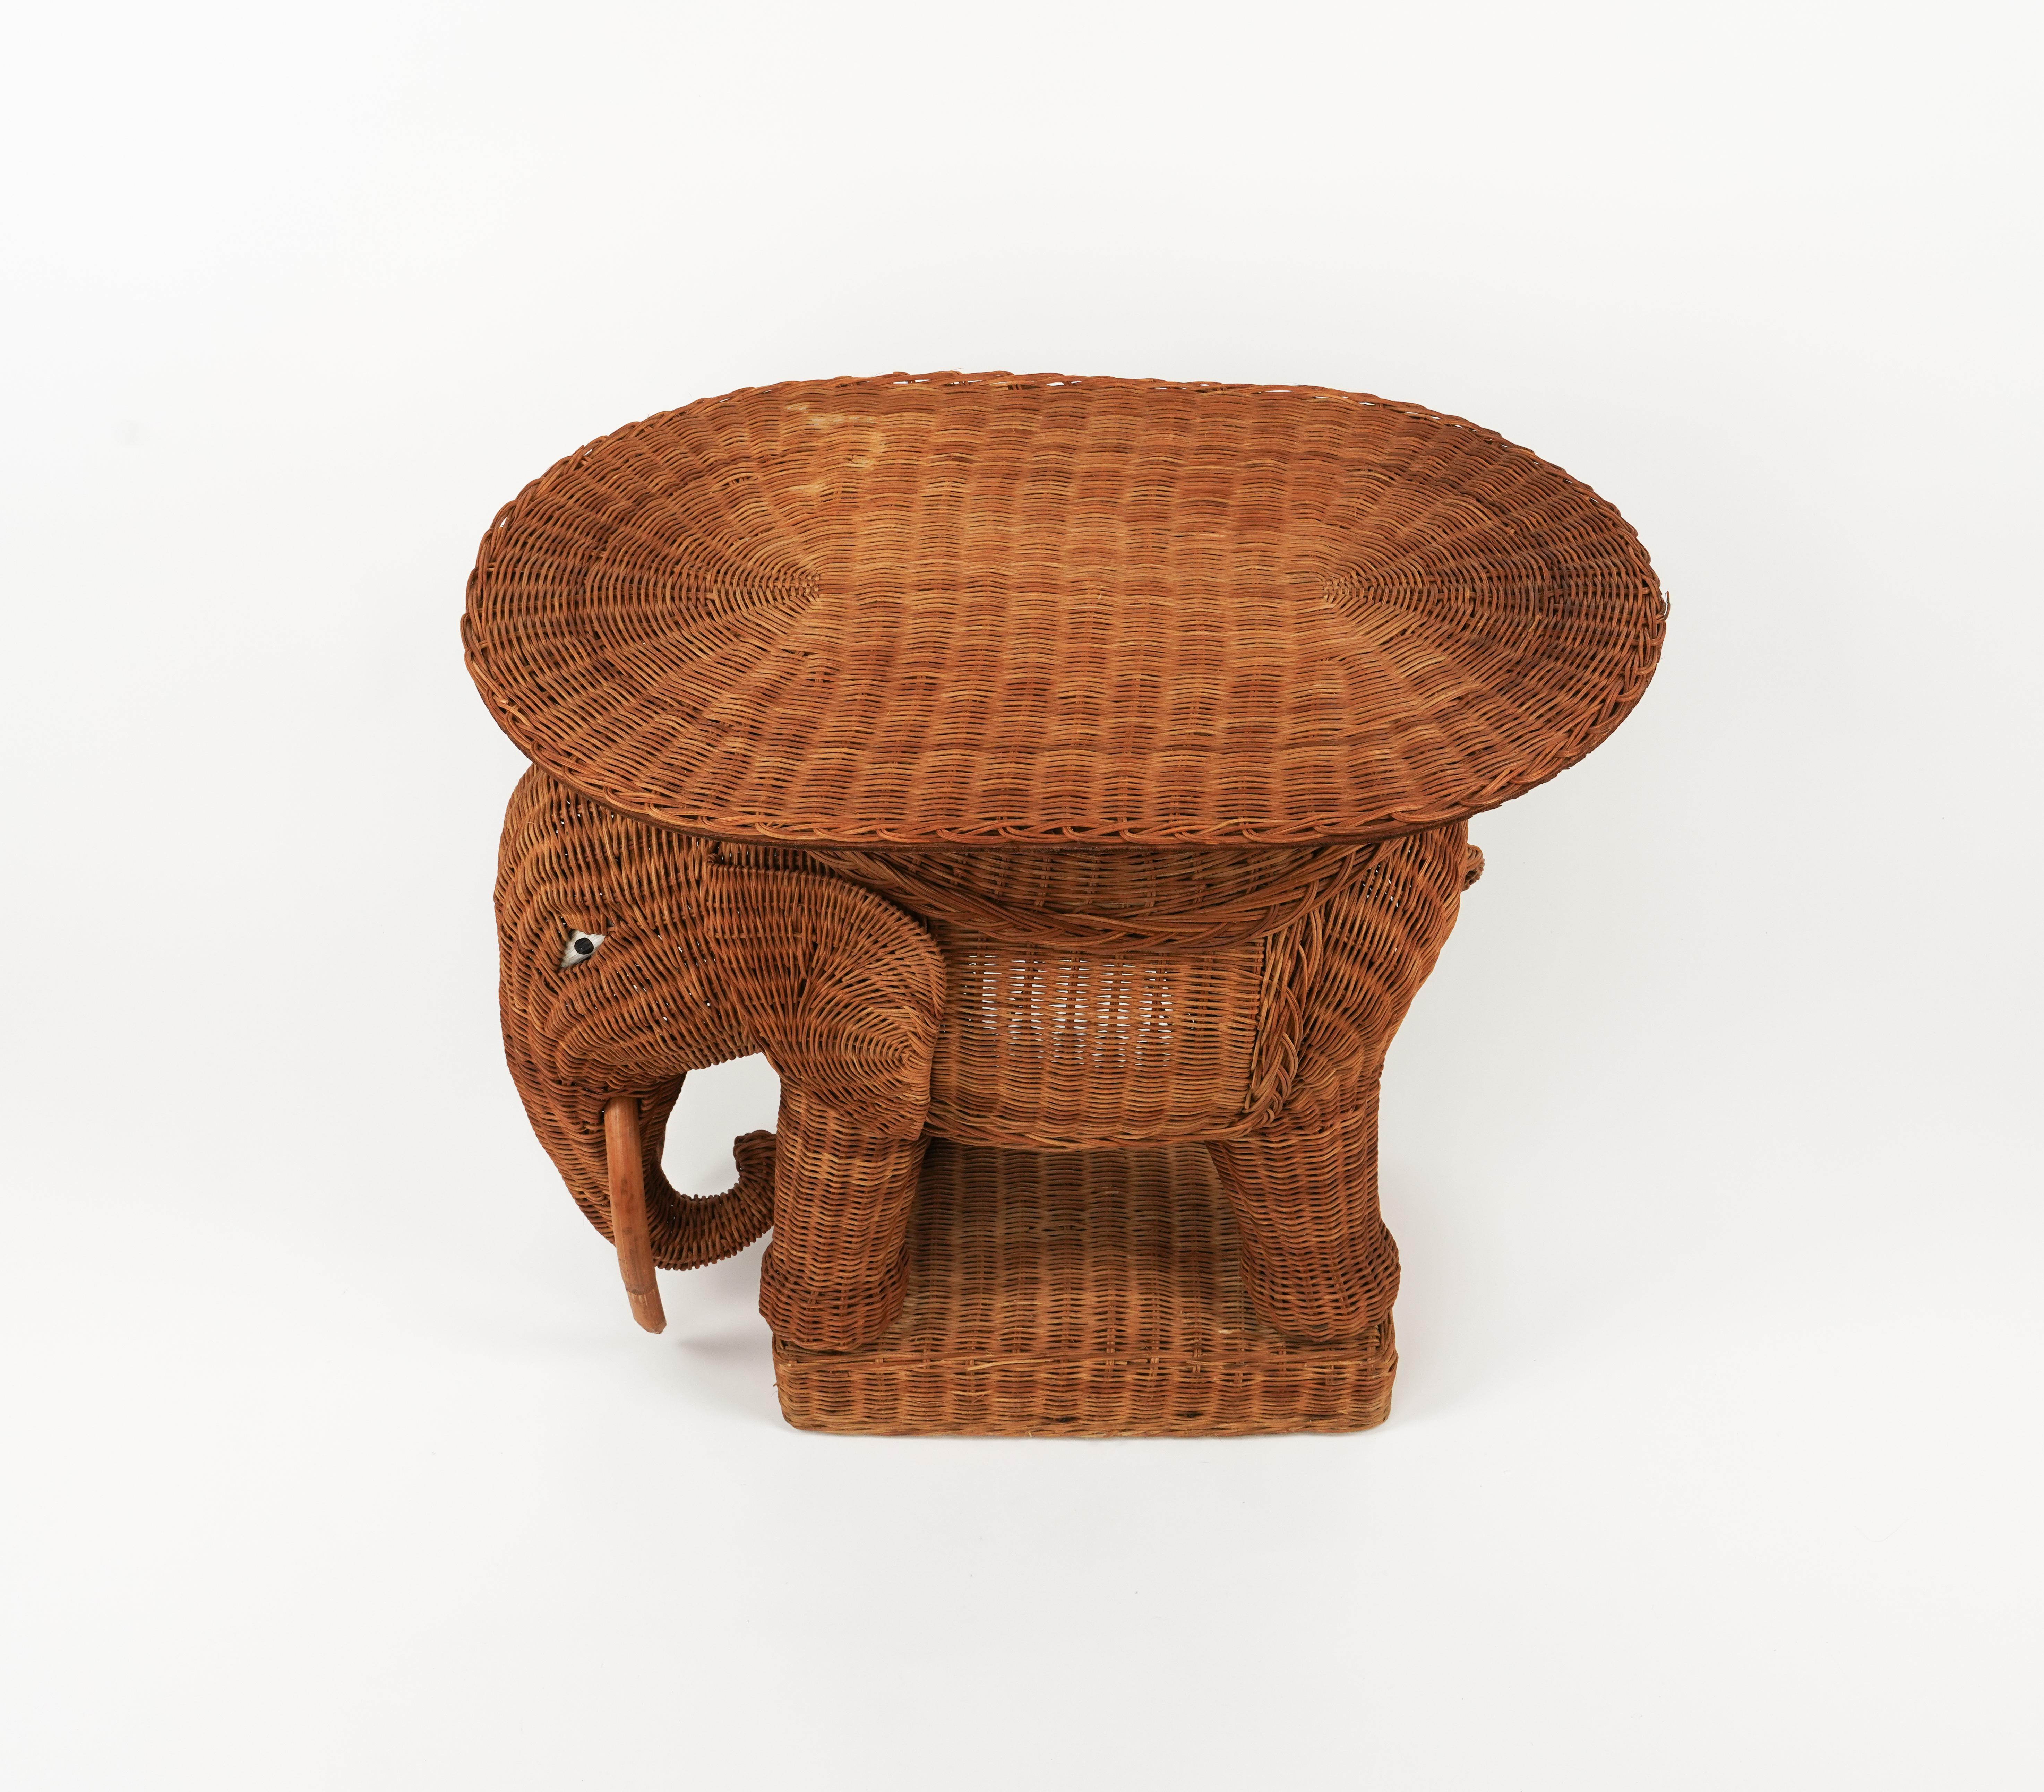 Rattan and Wicker Elephant Side Coffee Table Vivai Del Sud Style, Italy, 1960s For Sale 1